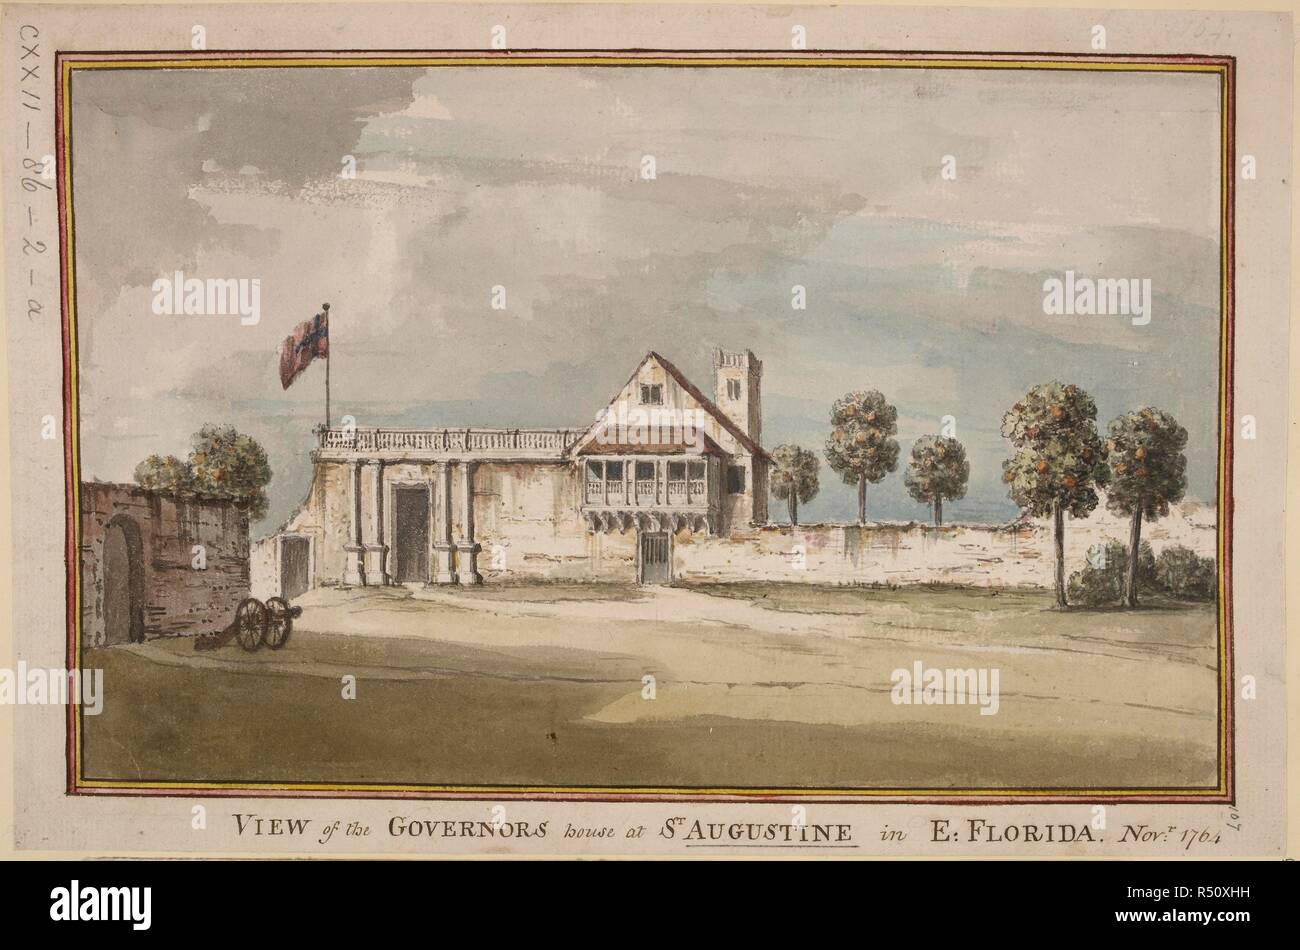 Picture of the governor's house, East Florida. view of the Governorâ€™s house at St. Augustine, in East Florida. A colored 'view of the Governorâ€™s house at St. Augustine, in East Florida, Nov. 1764'. Source: Maps K.Top.122.86.2-a. Stock Photo